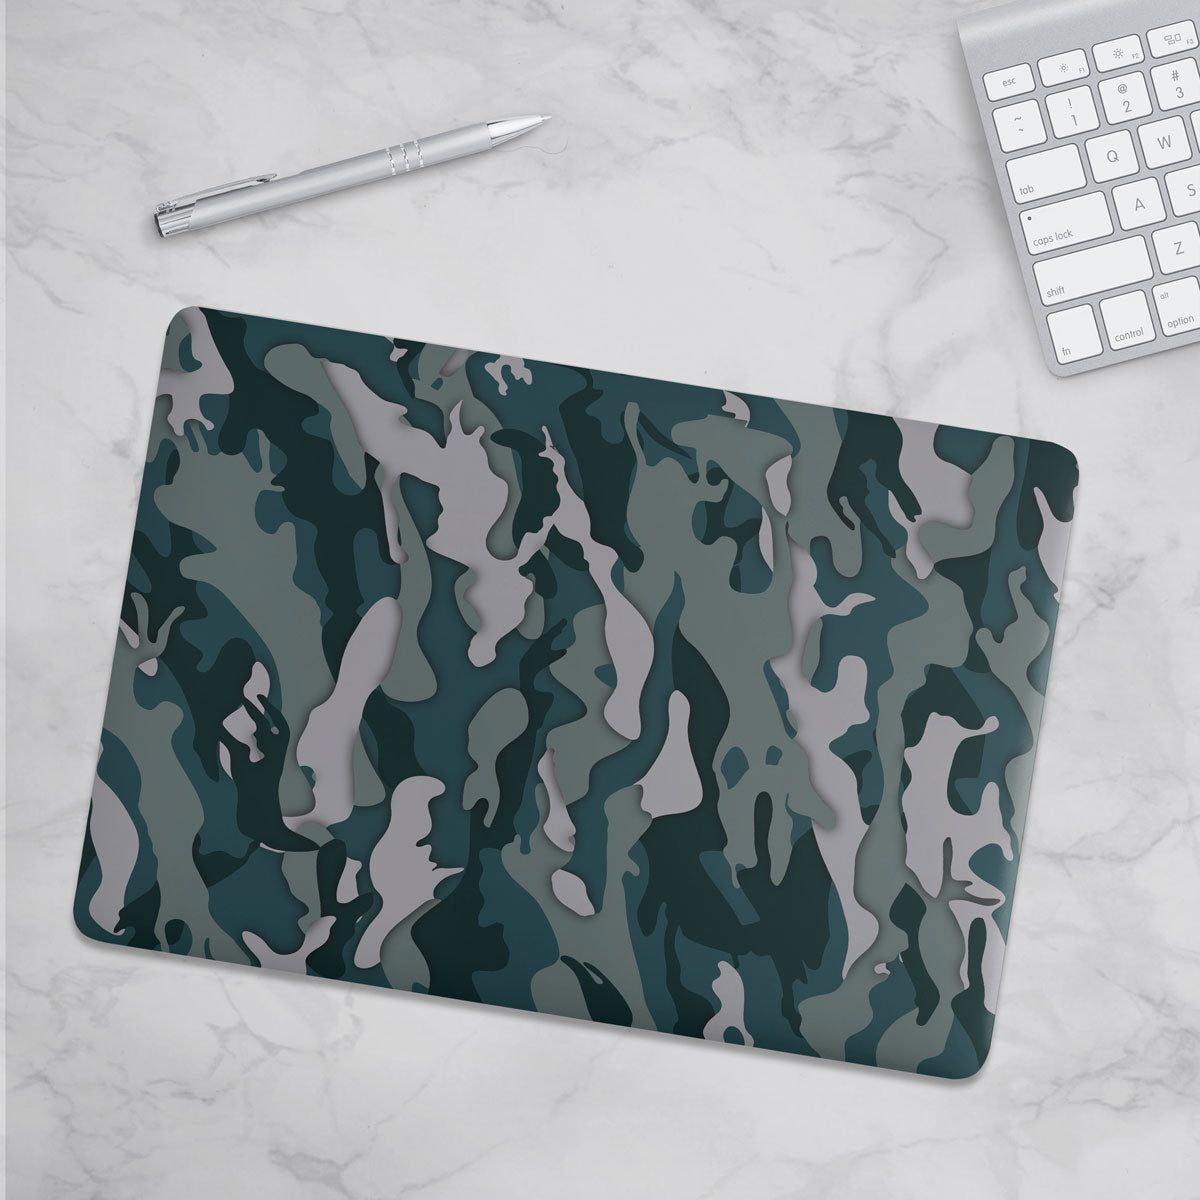 Load image into Gallery viewer, Macbook Hard Shell Case - Green Camo
